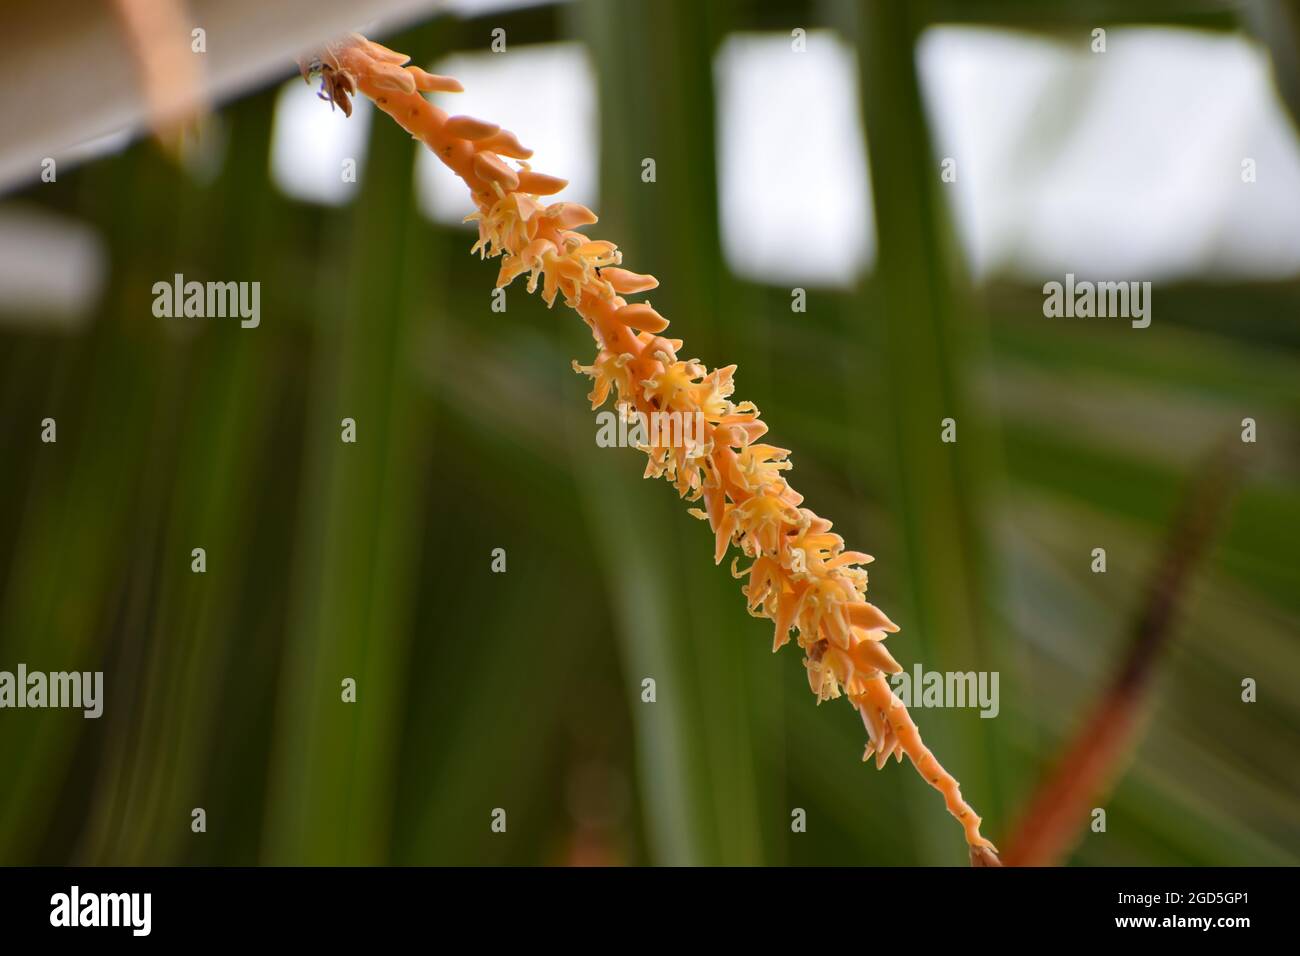 Isolated coconut flower, inflorescence flower, orange colour coconut flower clusters in nature Stock Photo